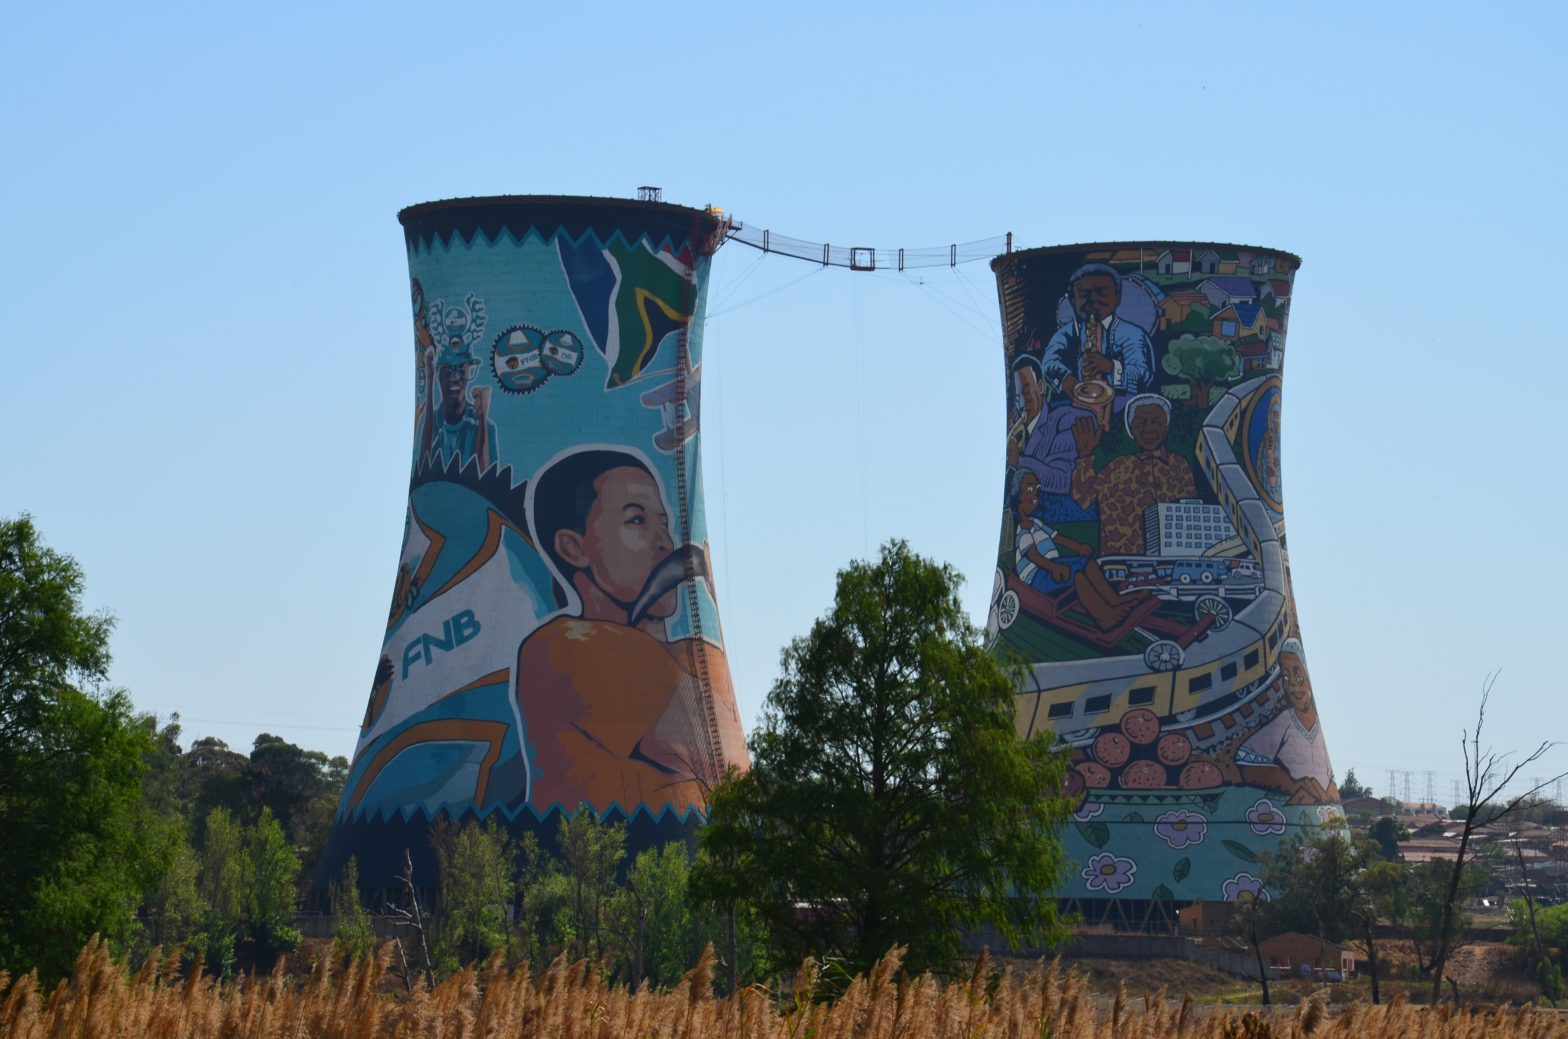 How To Spend 24 Hours In Black-Owned Soweto